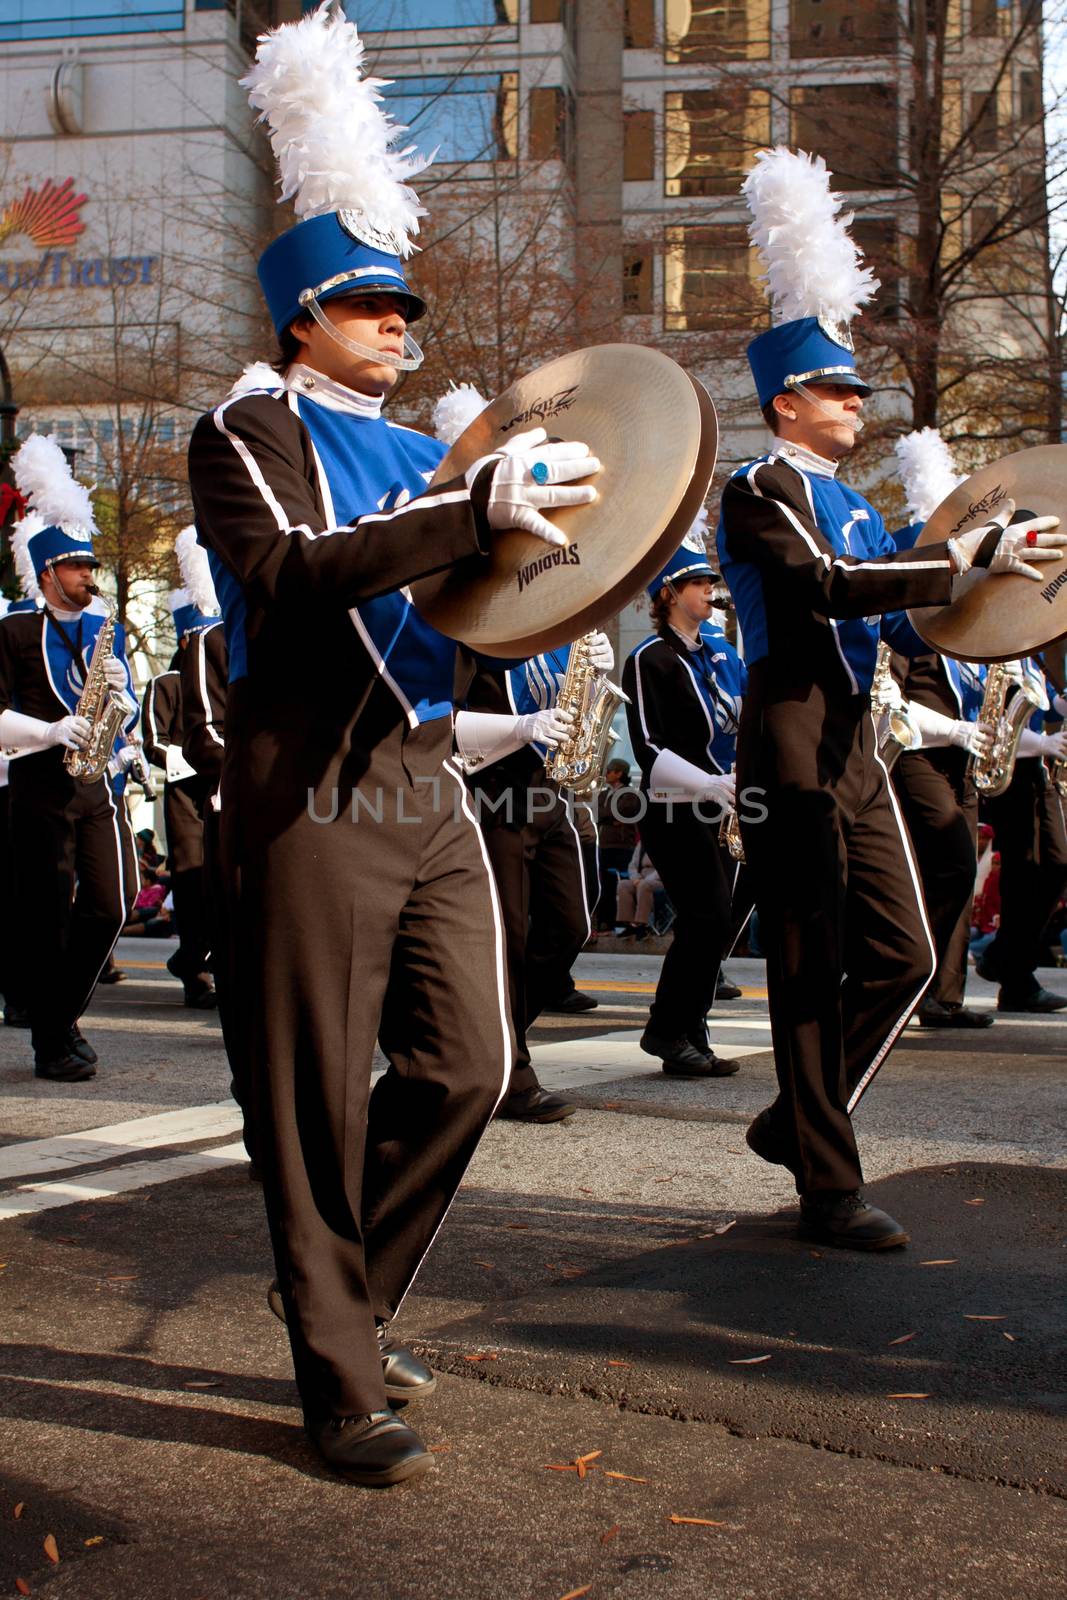 Marching Band Cymbal Players Perform In Atlanta Christmas Parade by BluIz60